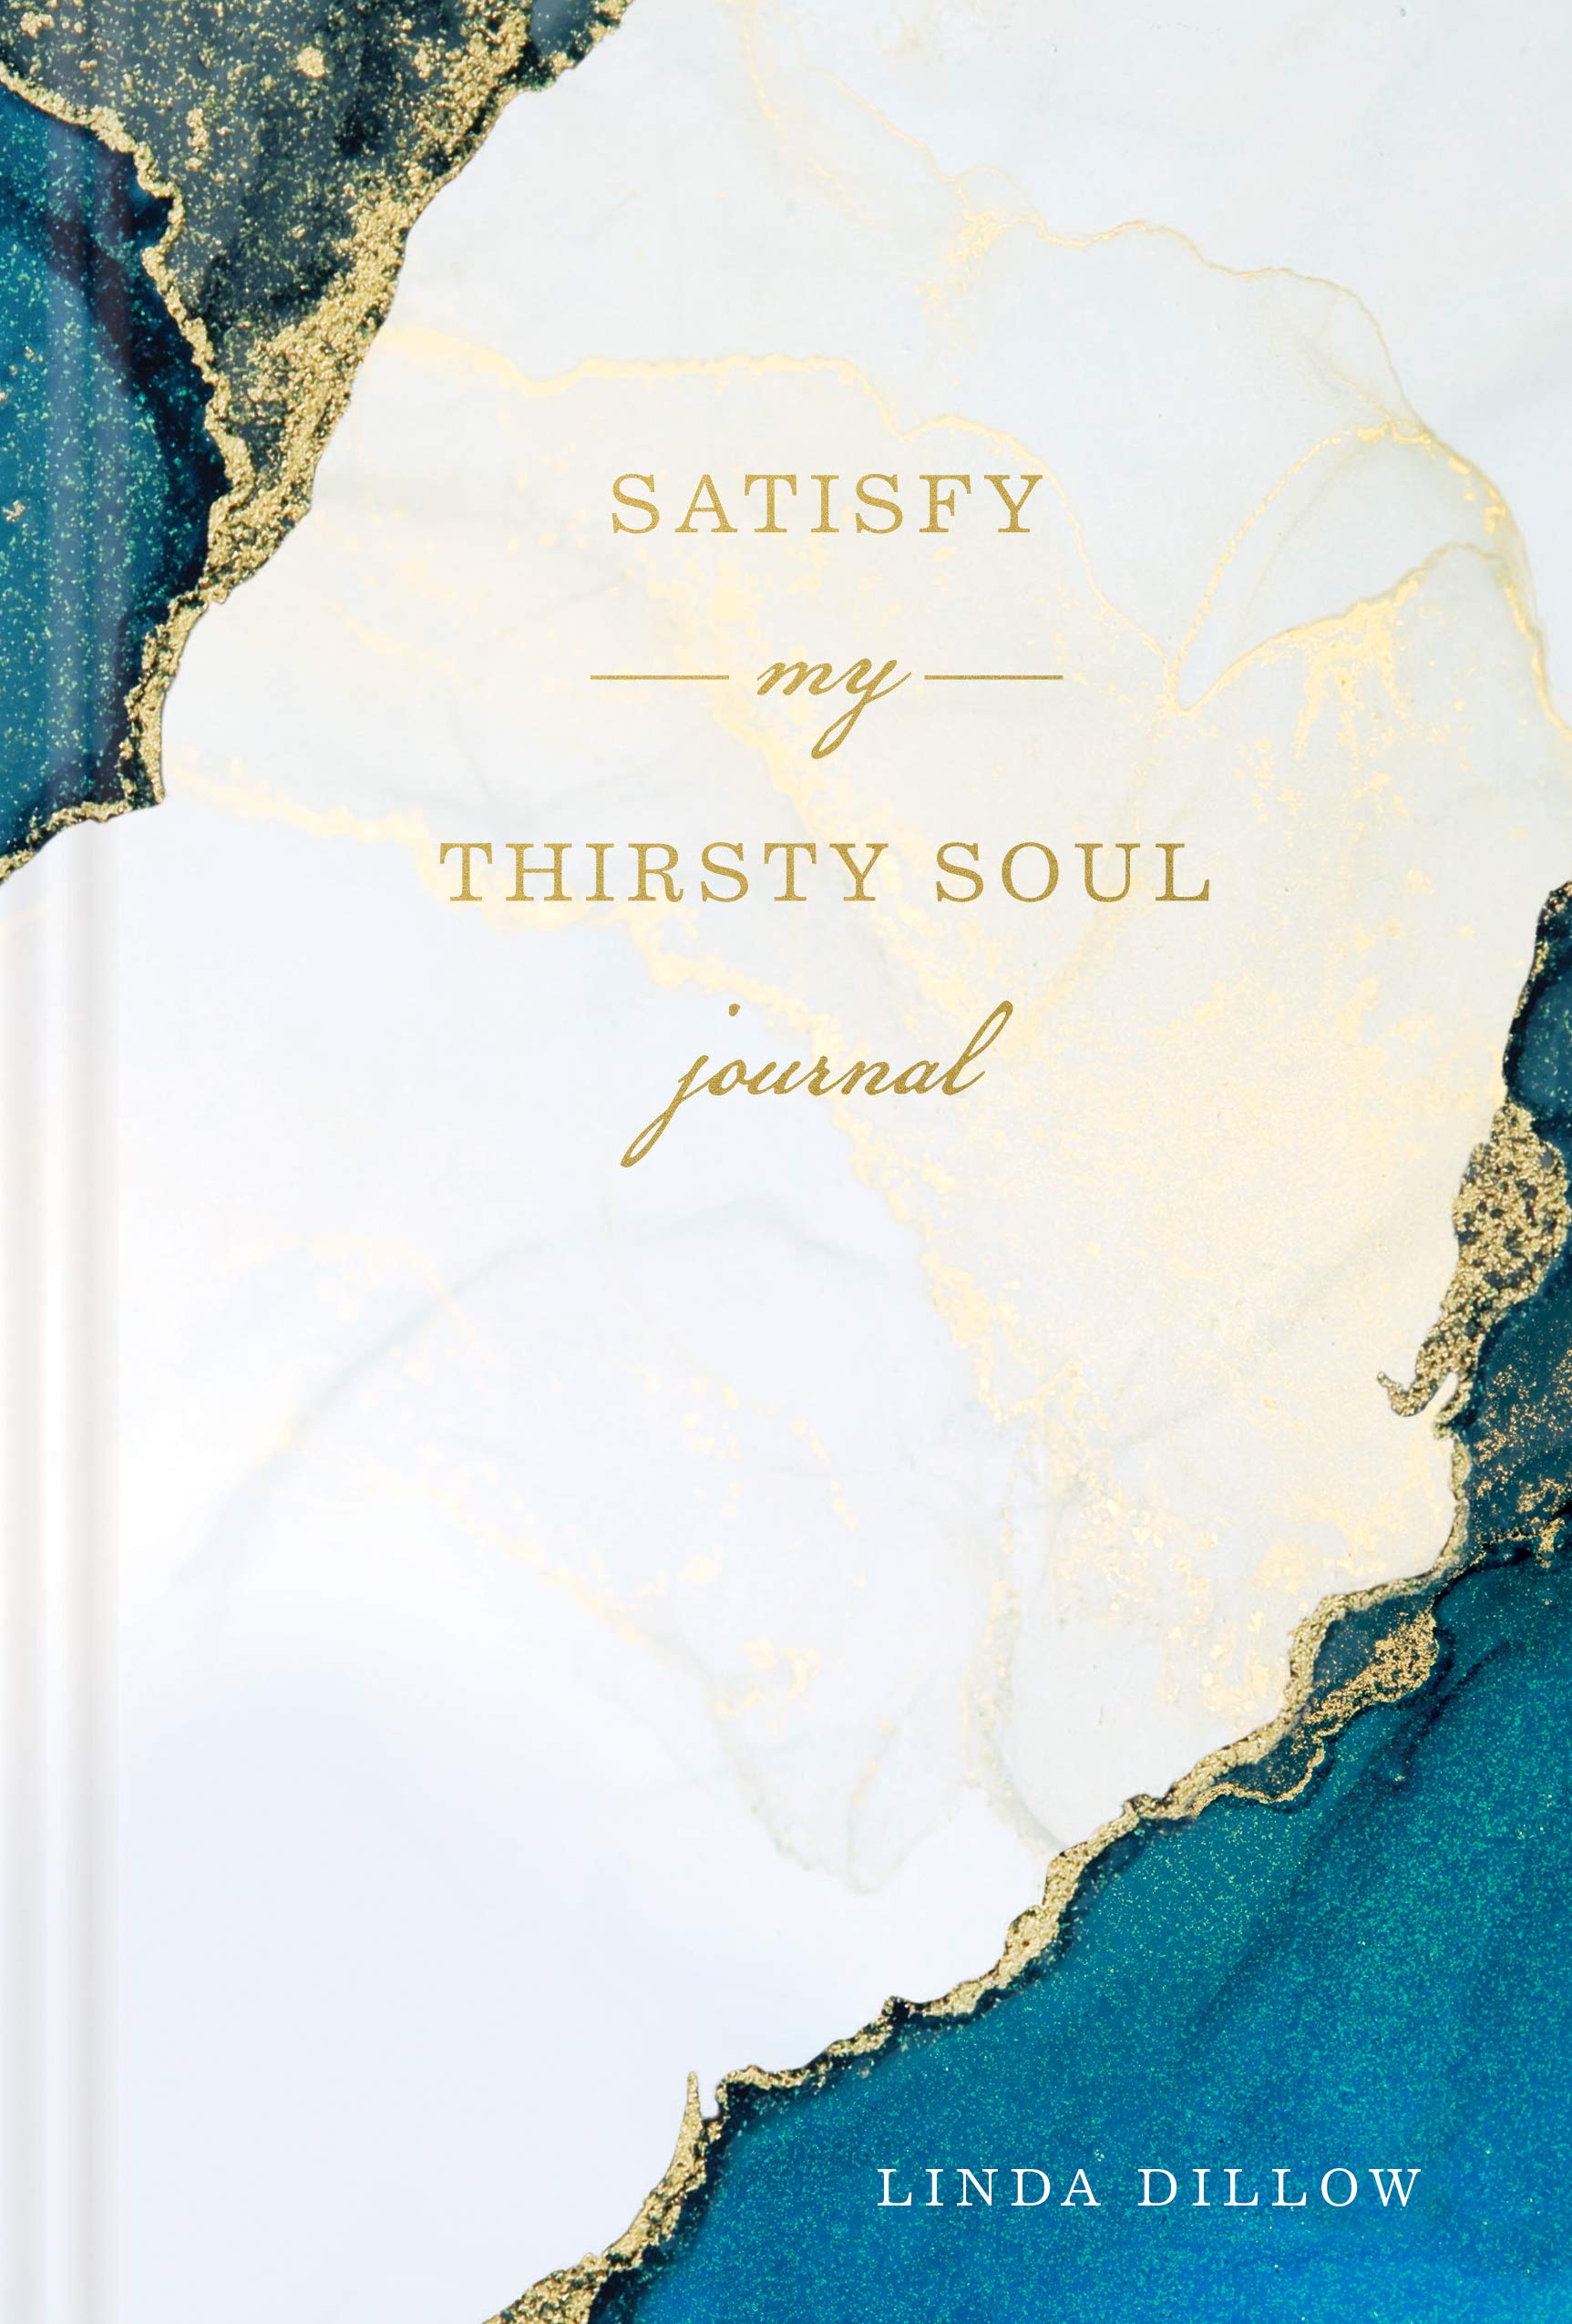 ROCKONLINE | Satisfy My Thirsty Soul Journal, Hardcover | Devotional | Journal | Quiet time | Christian Living | Prayer | Promises | Bible Verse | New Creation Church | NCC | Joseph Prince | ROCK Bookshop | ROCK Bookstore | Star Vista | Free delivery for Singapore Orders above $50.